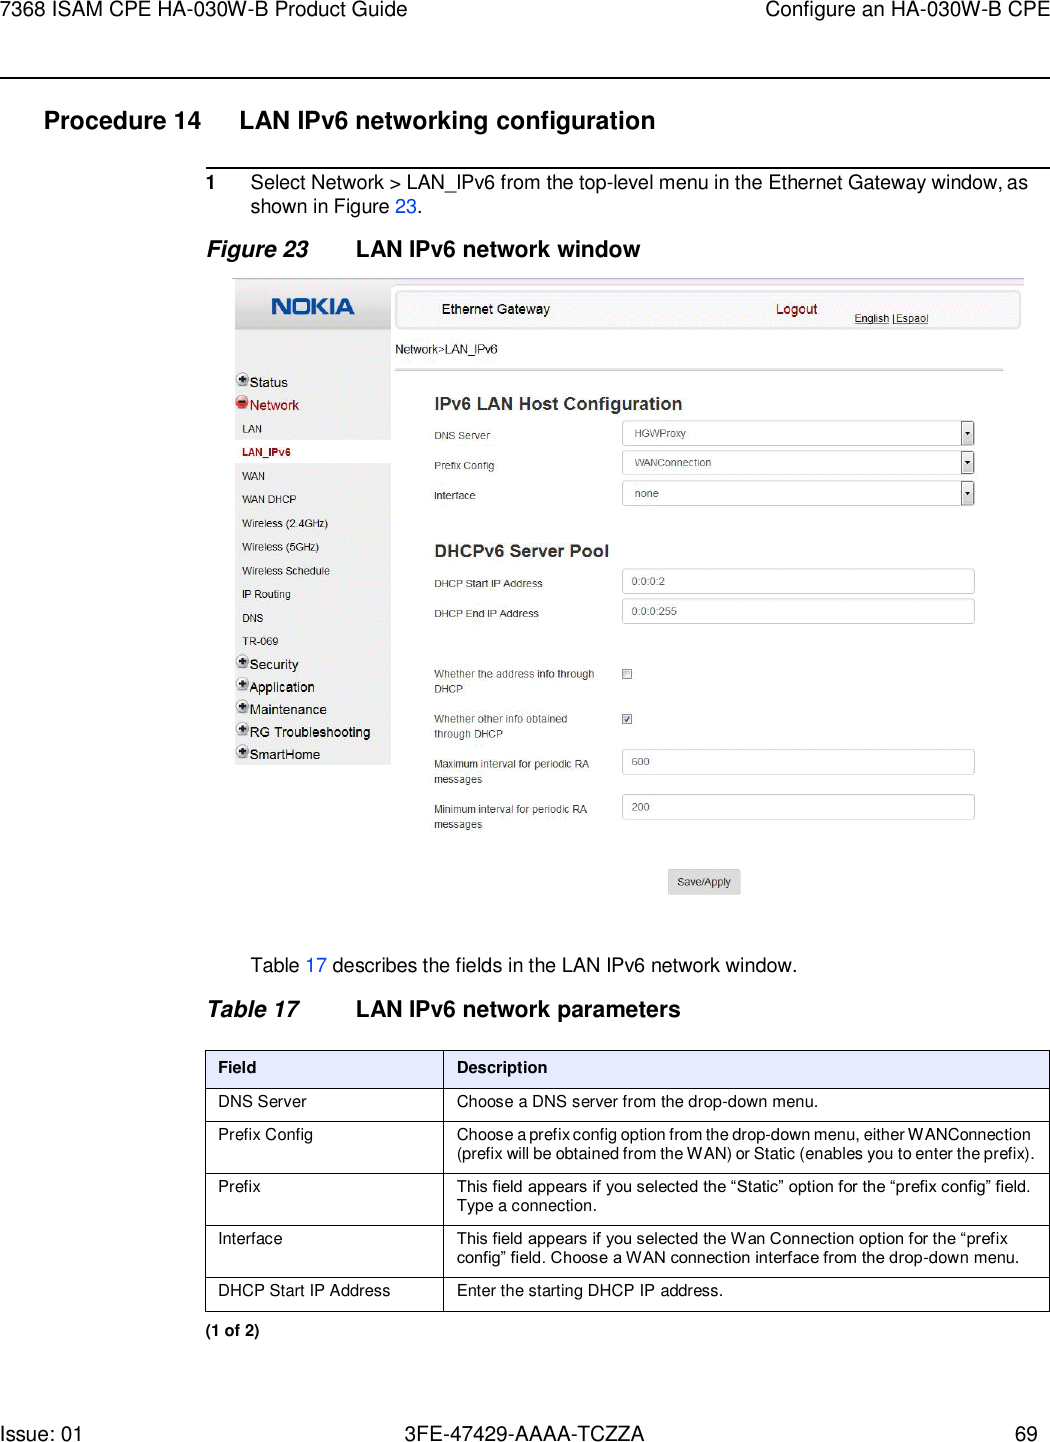 Issue: 01 3FE-47429-AAAA-TCZZA 69 7368 ISAM CPE HA-030W-B Product Guide Configure an HA-030W-B CPE    Procedure 14  LAN IPv6 networking configuration  1 Select Network &gt; LAN_IPv6 from the top-level menu in the Ethernet Gateway window, as shown in Figure 23. Figure 23 LAN IPv6 network window    Table 17 describes the fields in the LAN IPv6 network window.  Table 17 LAN IPv6 network parameters  Field Description DNS Server Choose a DNS server from the drop-down menu. Prefix Config Choose a prefix config option from the drop-down menu, either WANConnection (prefix will be obtained from the WAN) or Static (enables you to enter the prefix). Prefix This field appears if you selected the “Static” option for the “prefix config” field. Type a connection. Interface This field appears if you selected the Wan Connection option for the “prefix config” field. Choose a WAN connection interface from the drop-down menu. DHCP Start IP Address Enter the starting DHCP IP address. (1 of 2) 